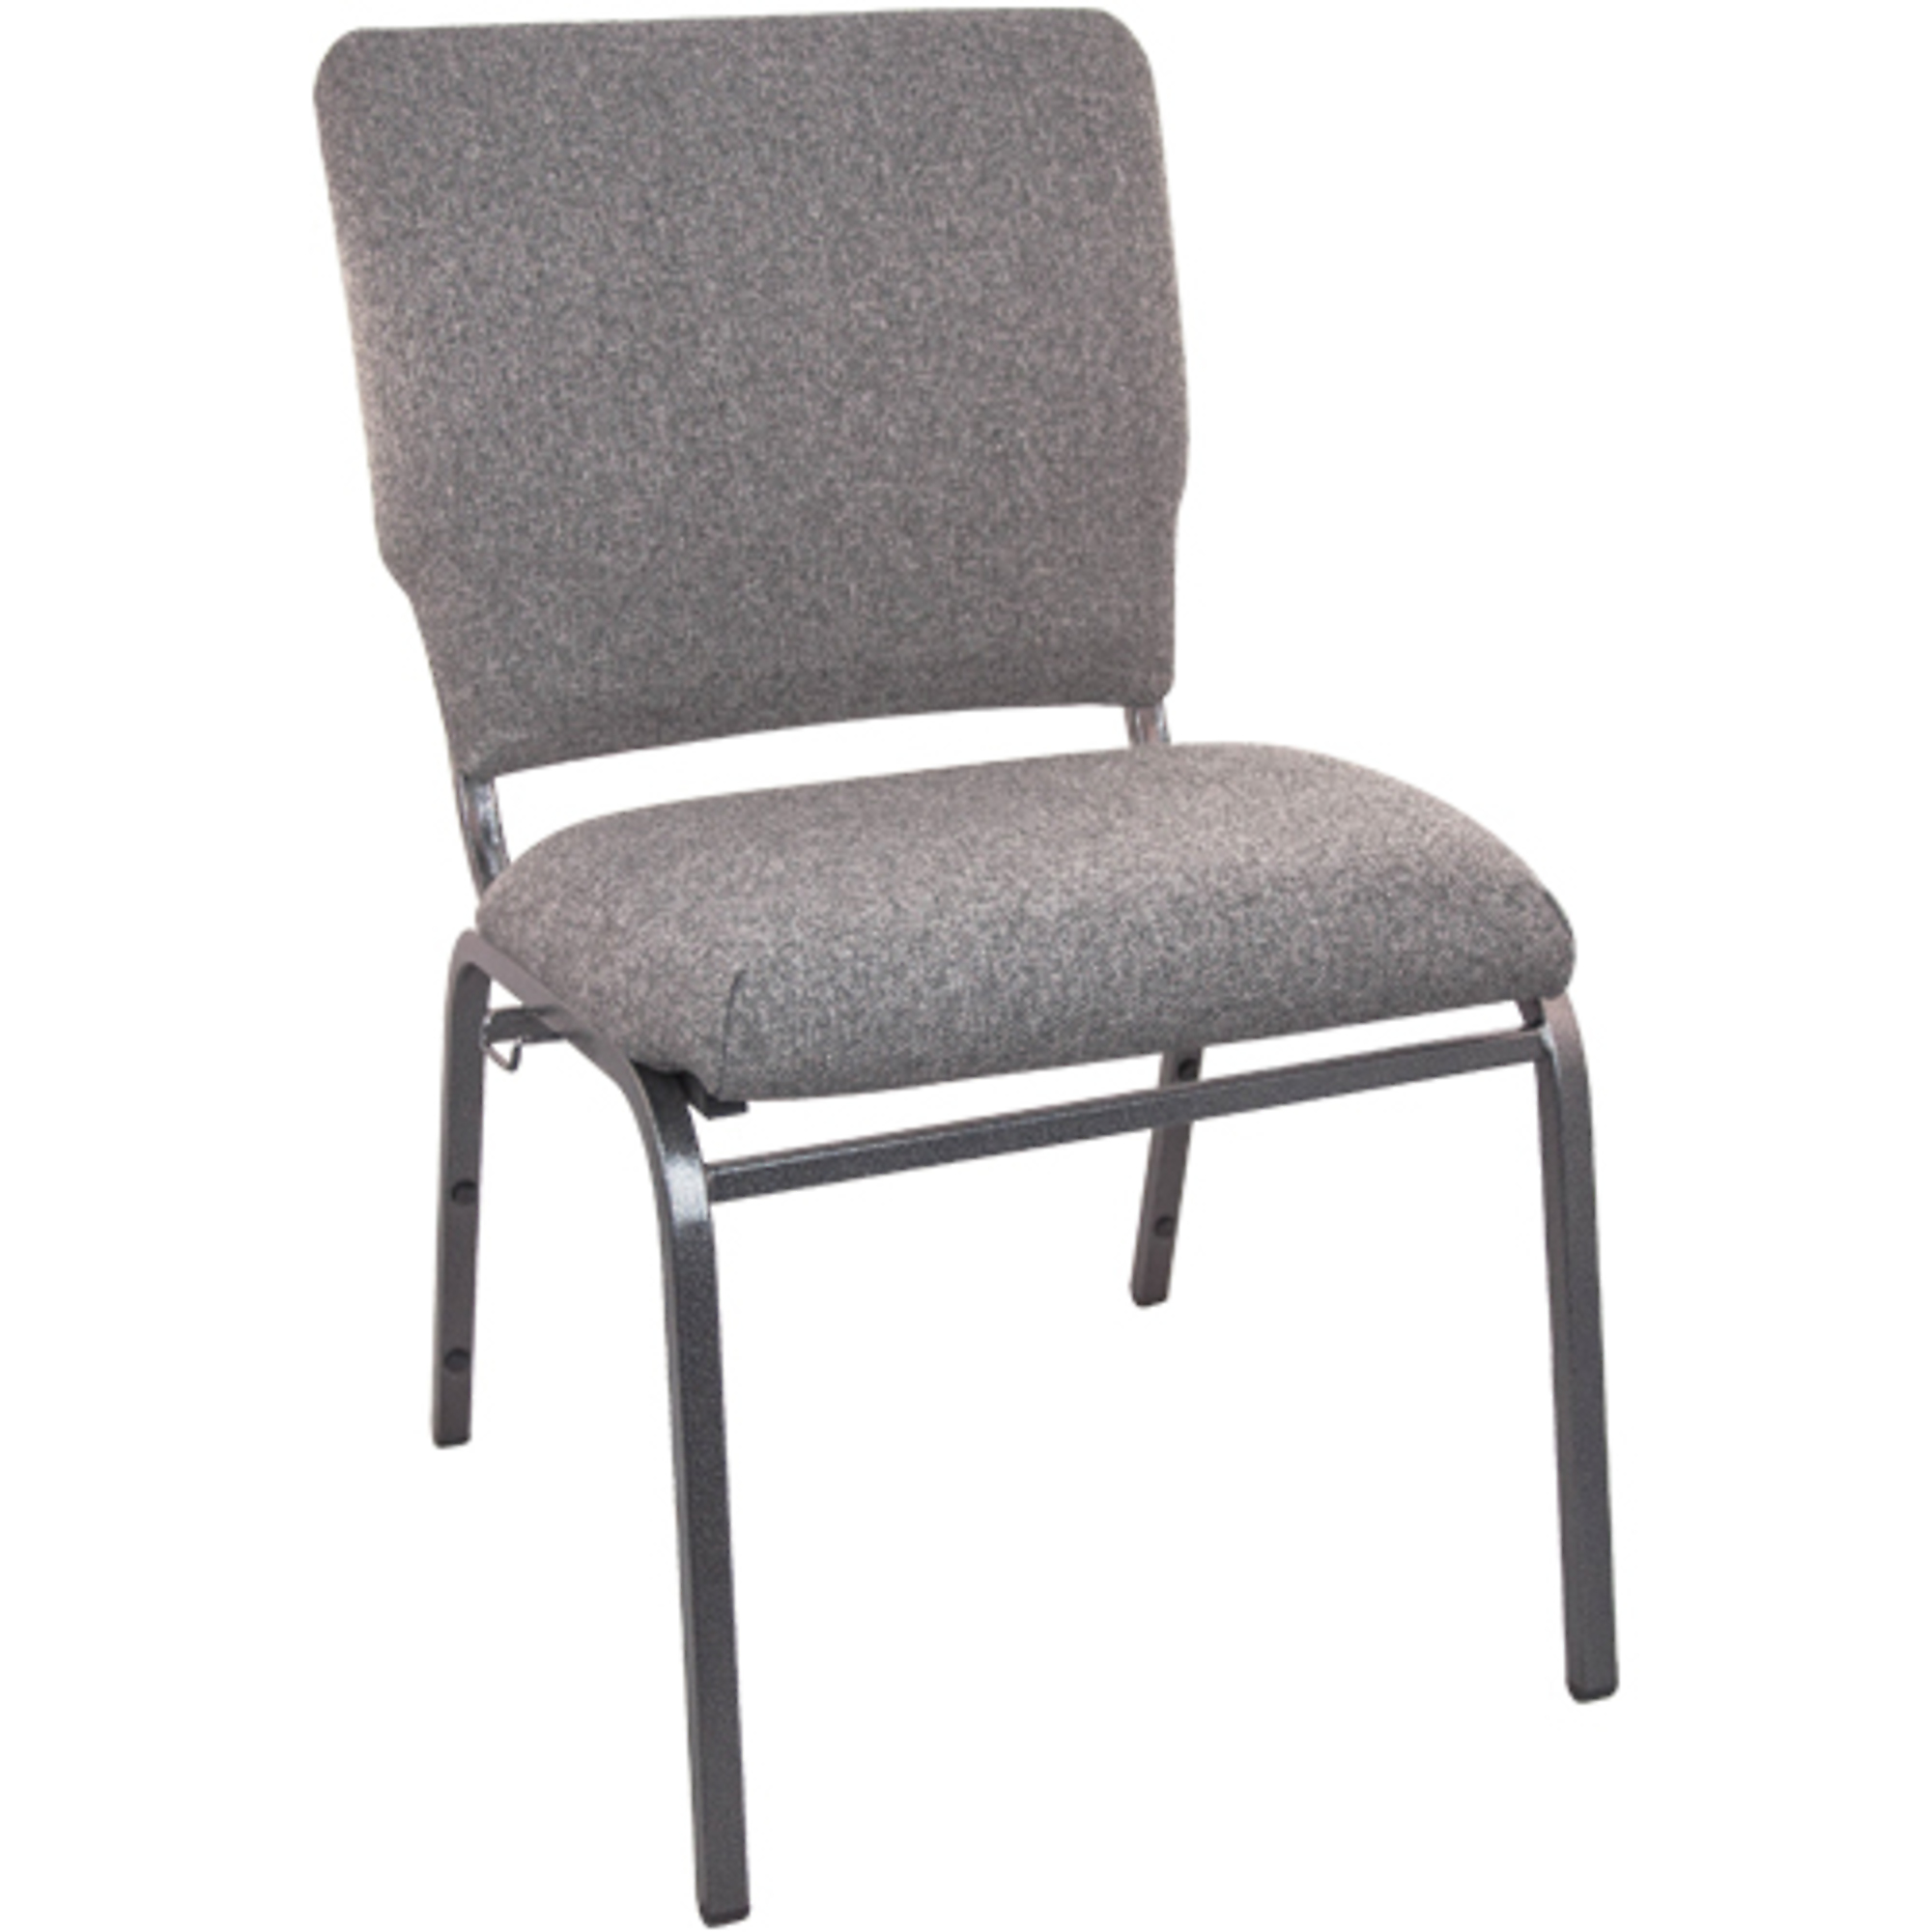 Flash Furniture, Charcoal Gray Multipurpose 18.5Inch W Church Chair, Primary Color Gray, Included (qty.) 1, Model SEPCHT185111